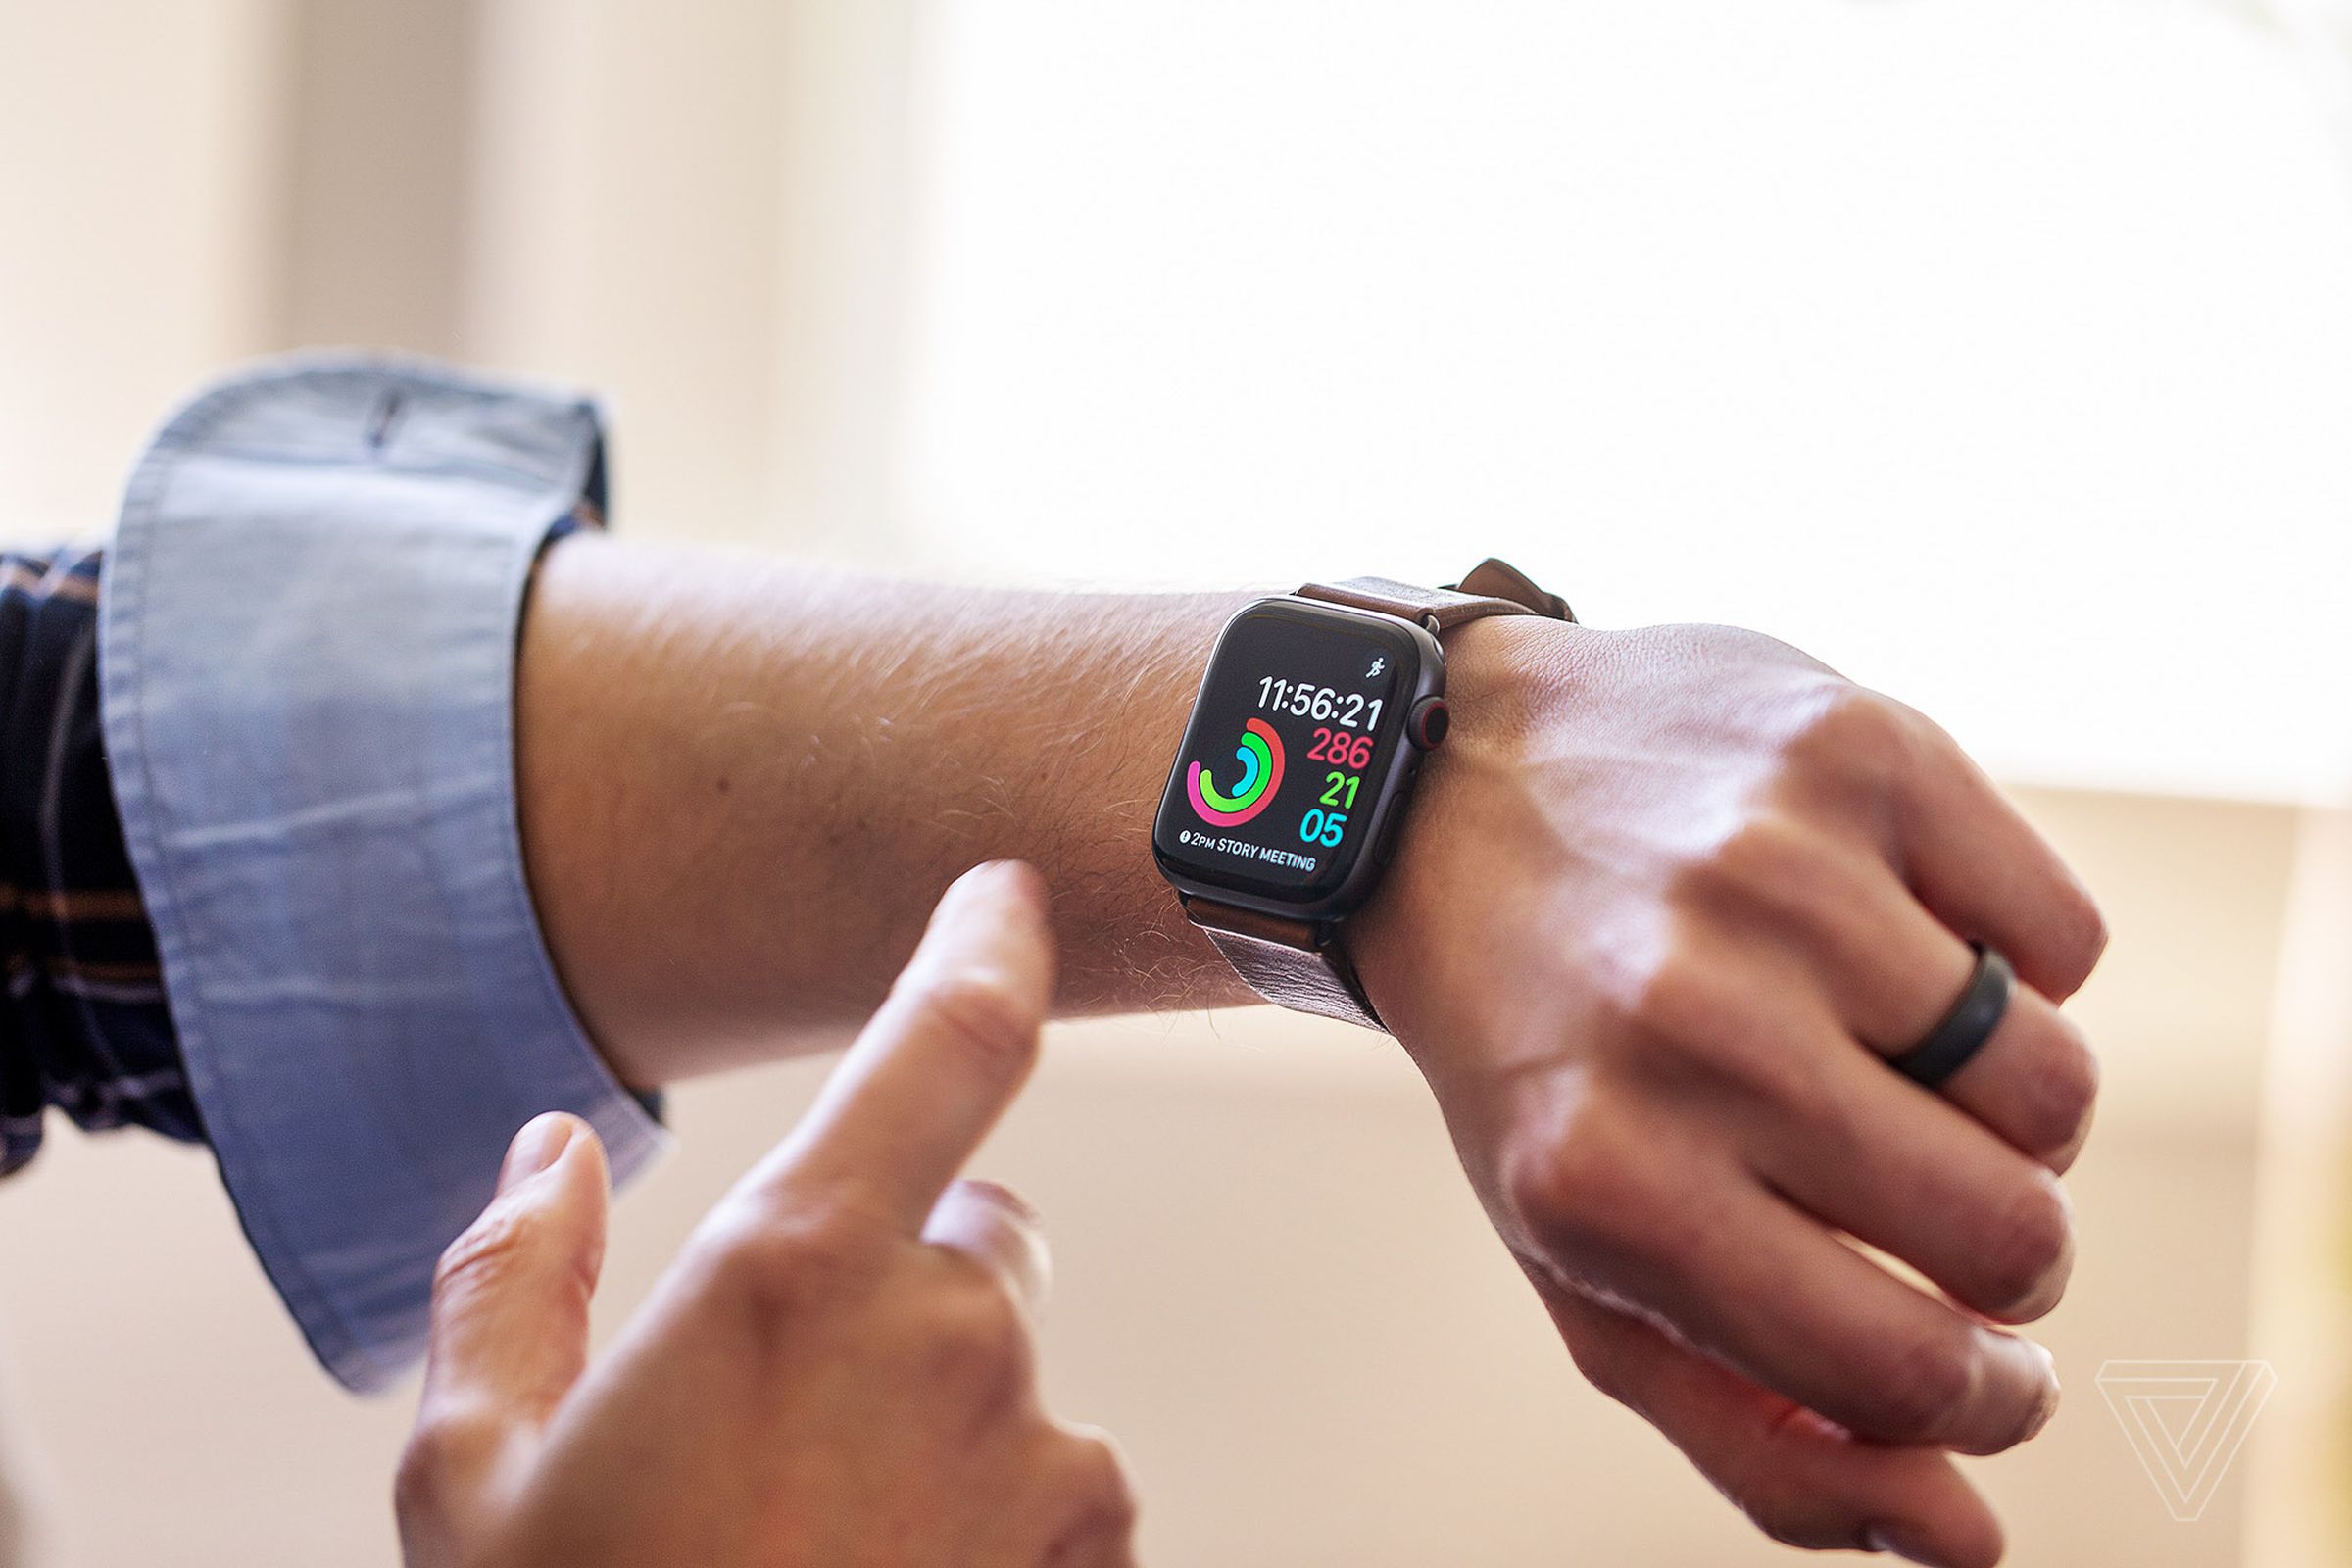 The Apple Watch prioritizes consistency above all else.